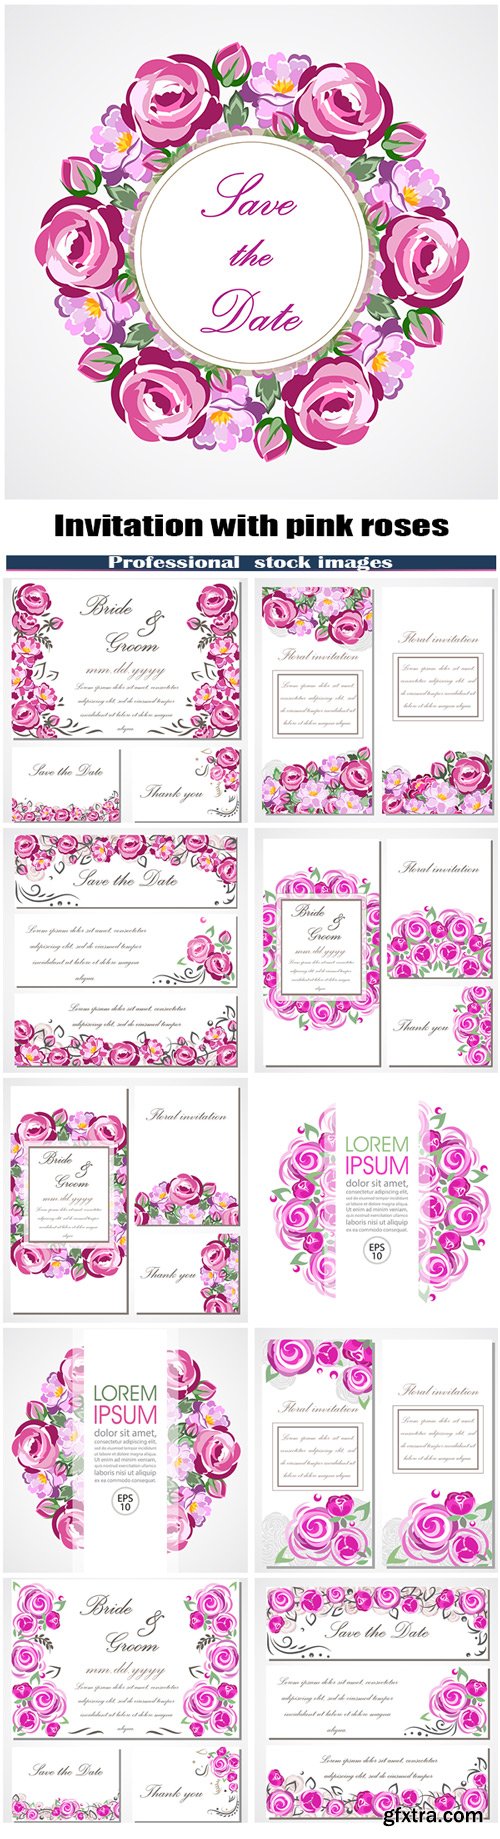 Vector invitation card with pink roses for wedding